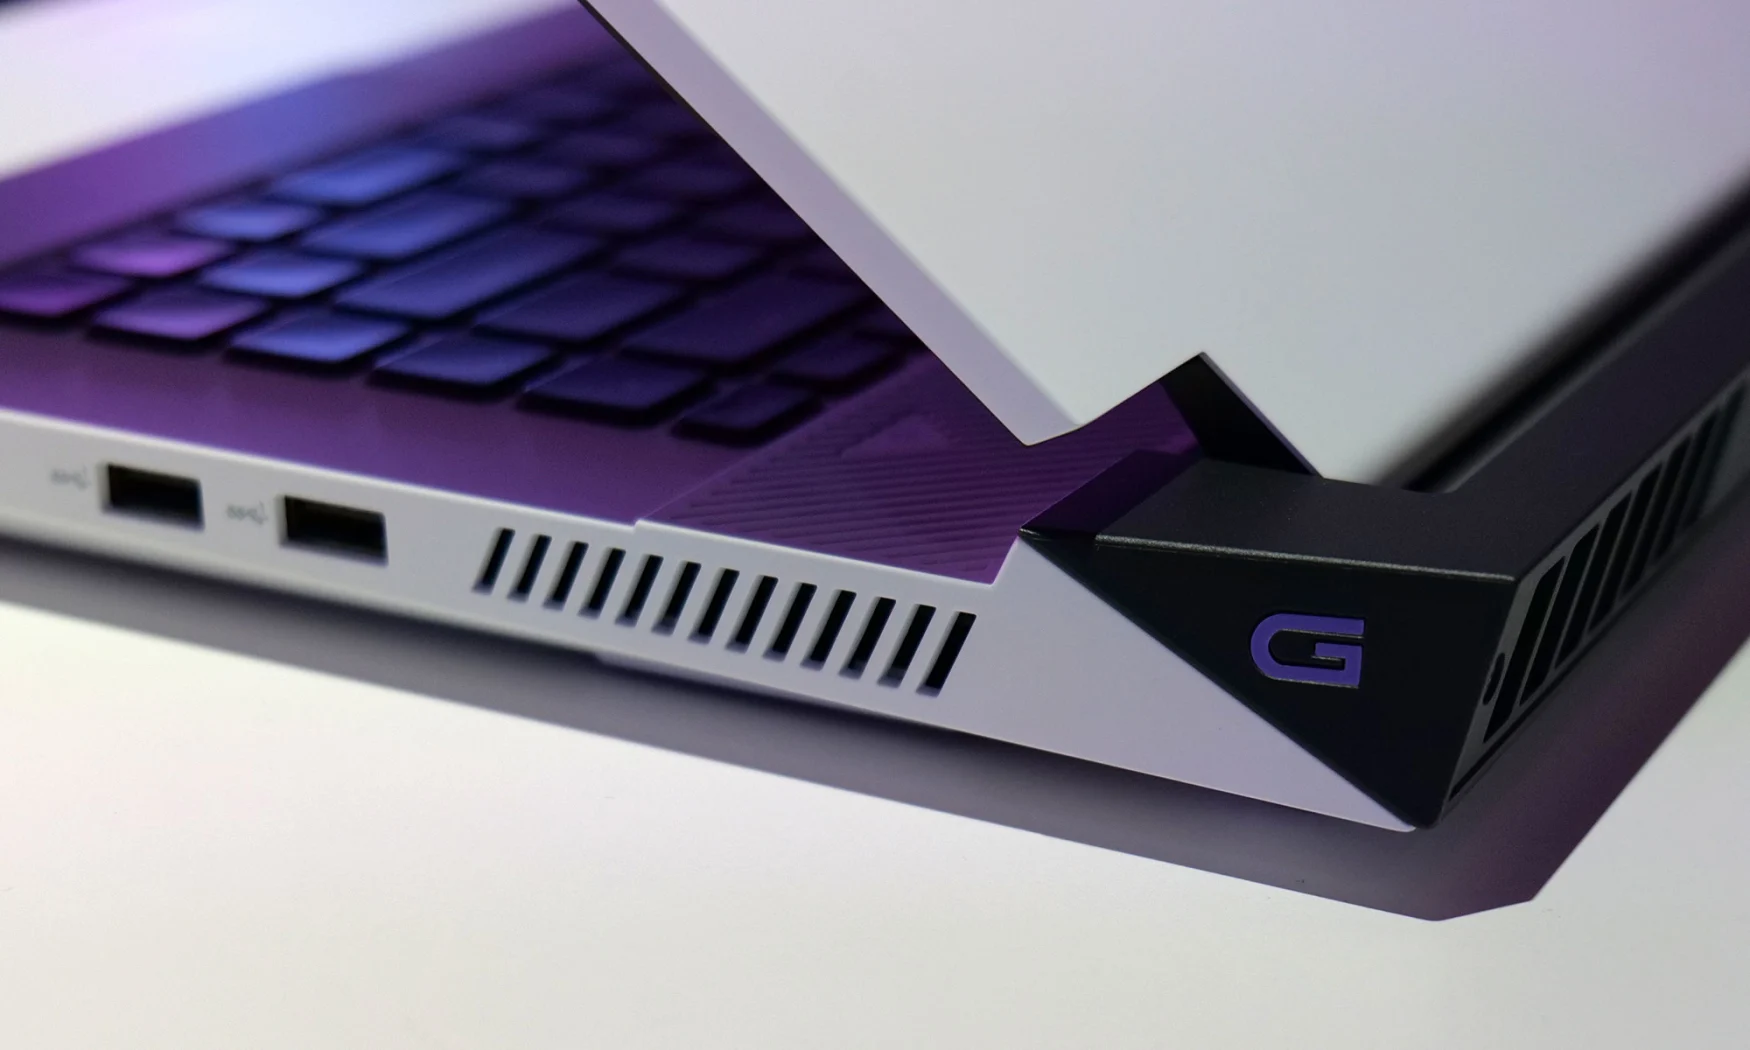 Even though the G-series line are budget gaming laptops, Dell still paid attention to small details like the color-matched accent logos on the side of the system. 